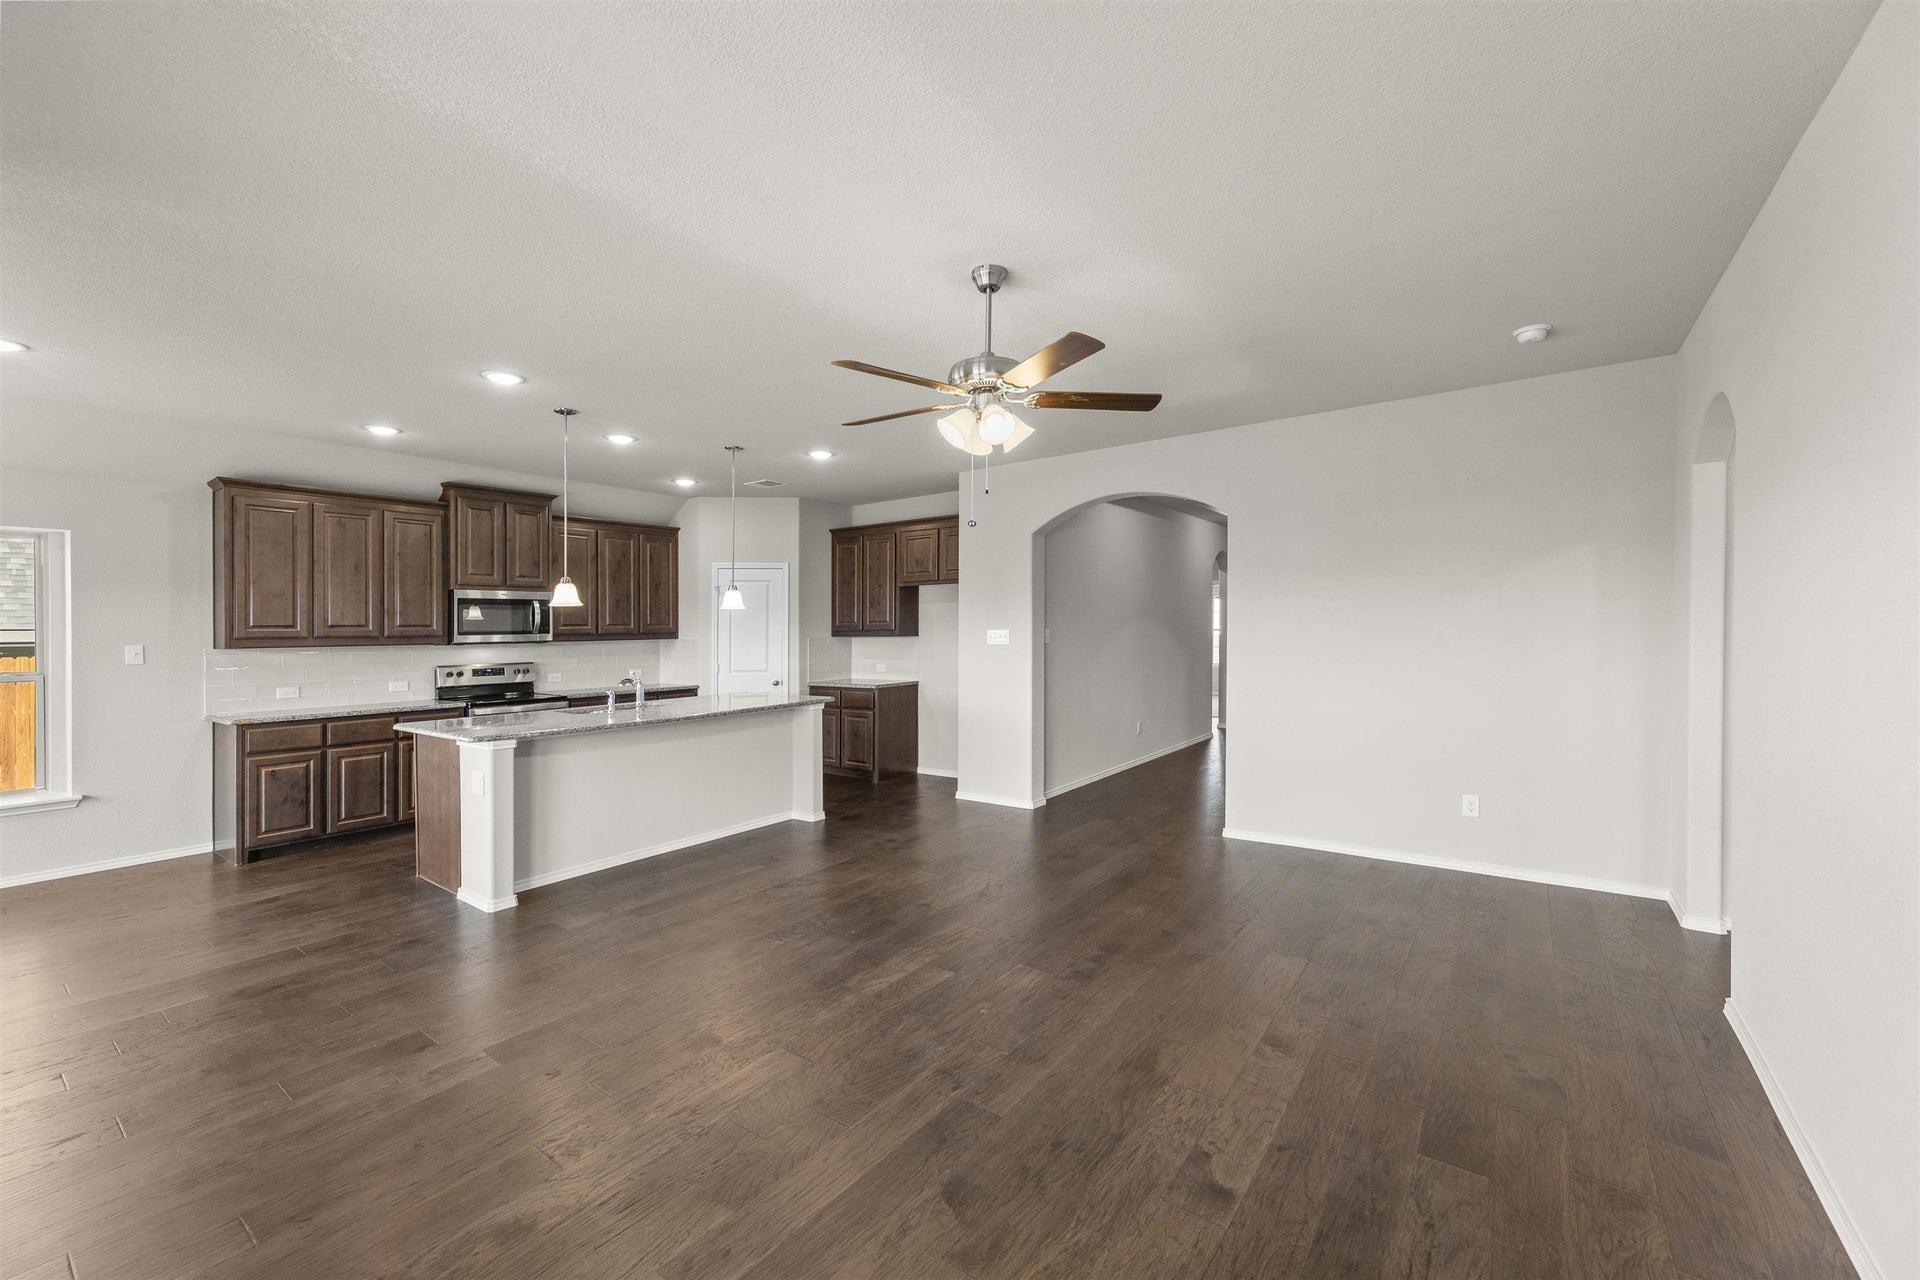 3br New Home in Azle, TX